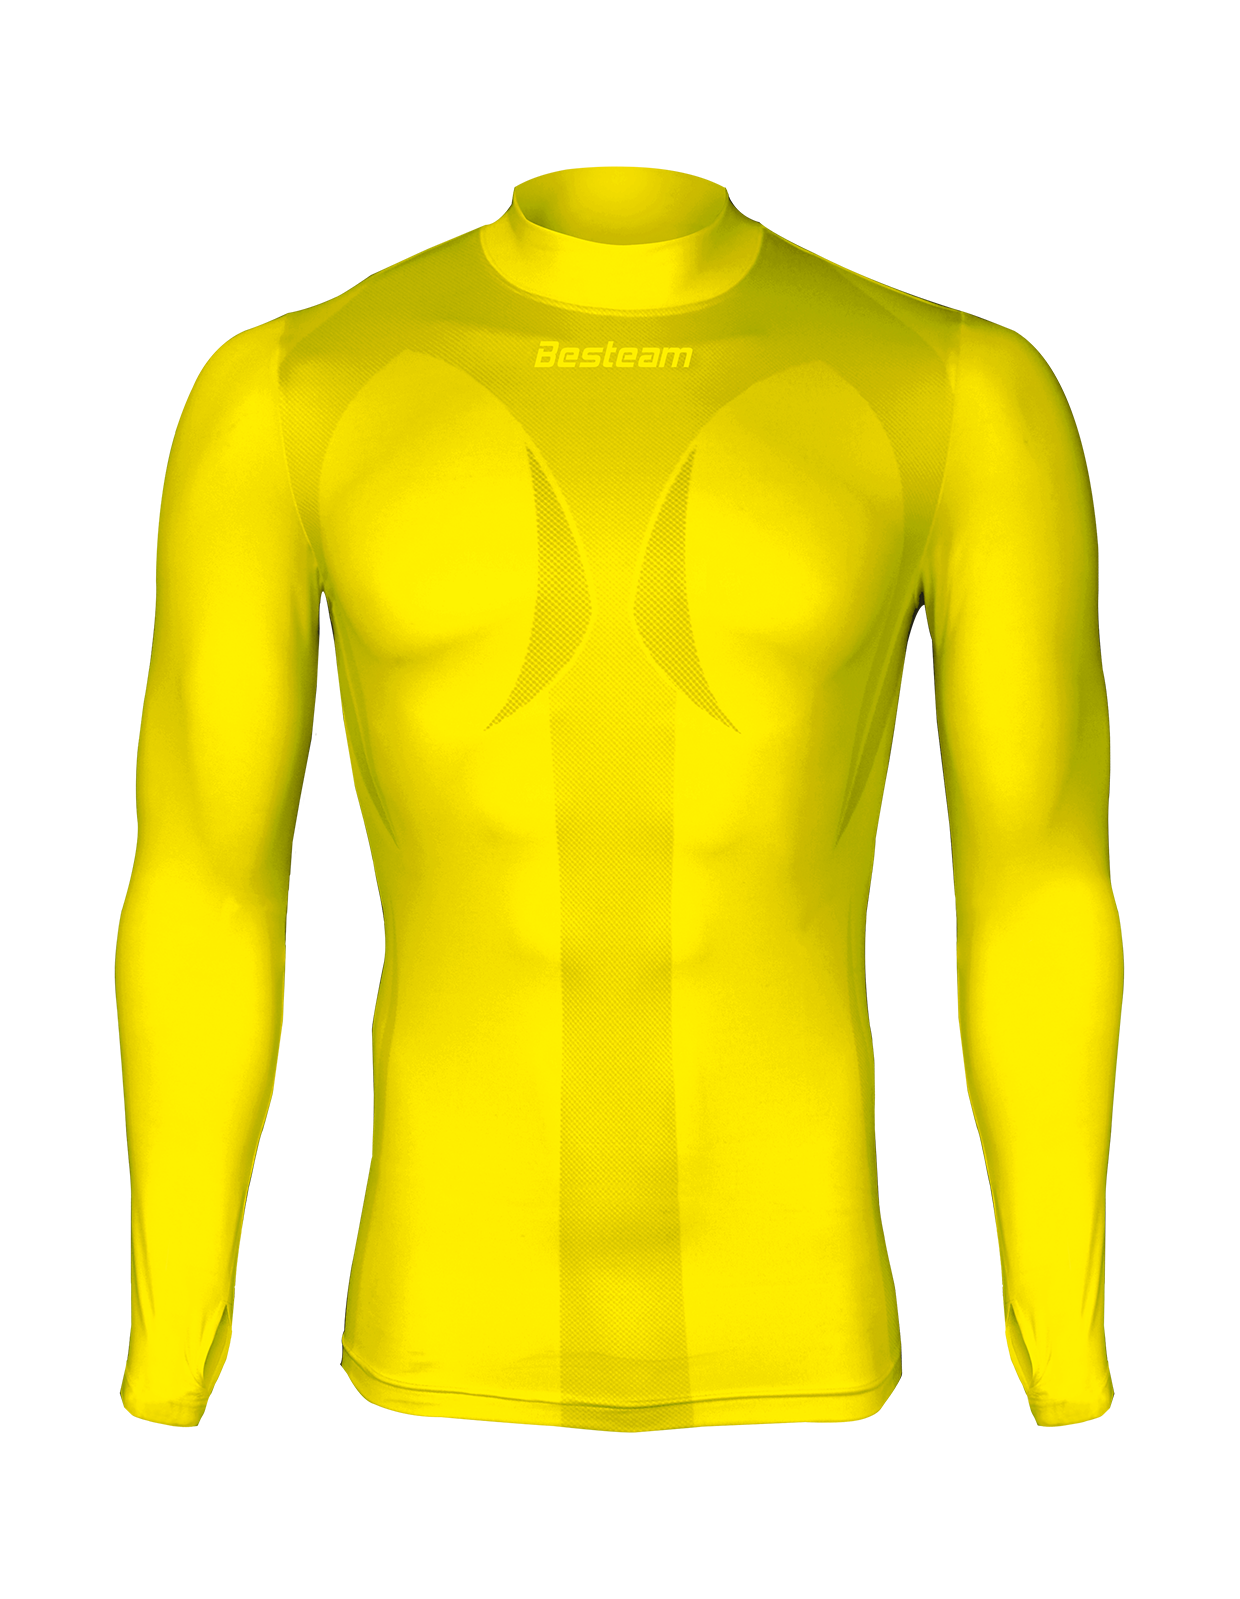 Compression Long Sleeve Top Yellow